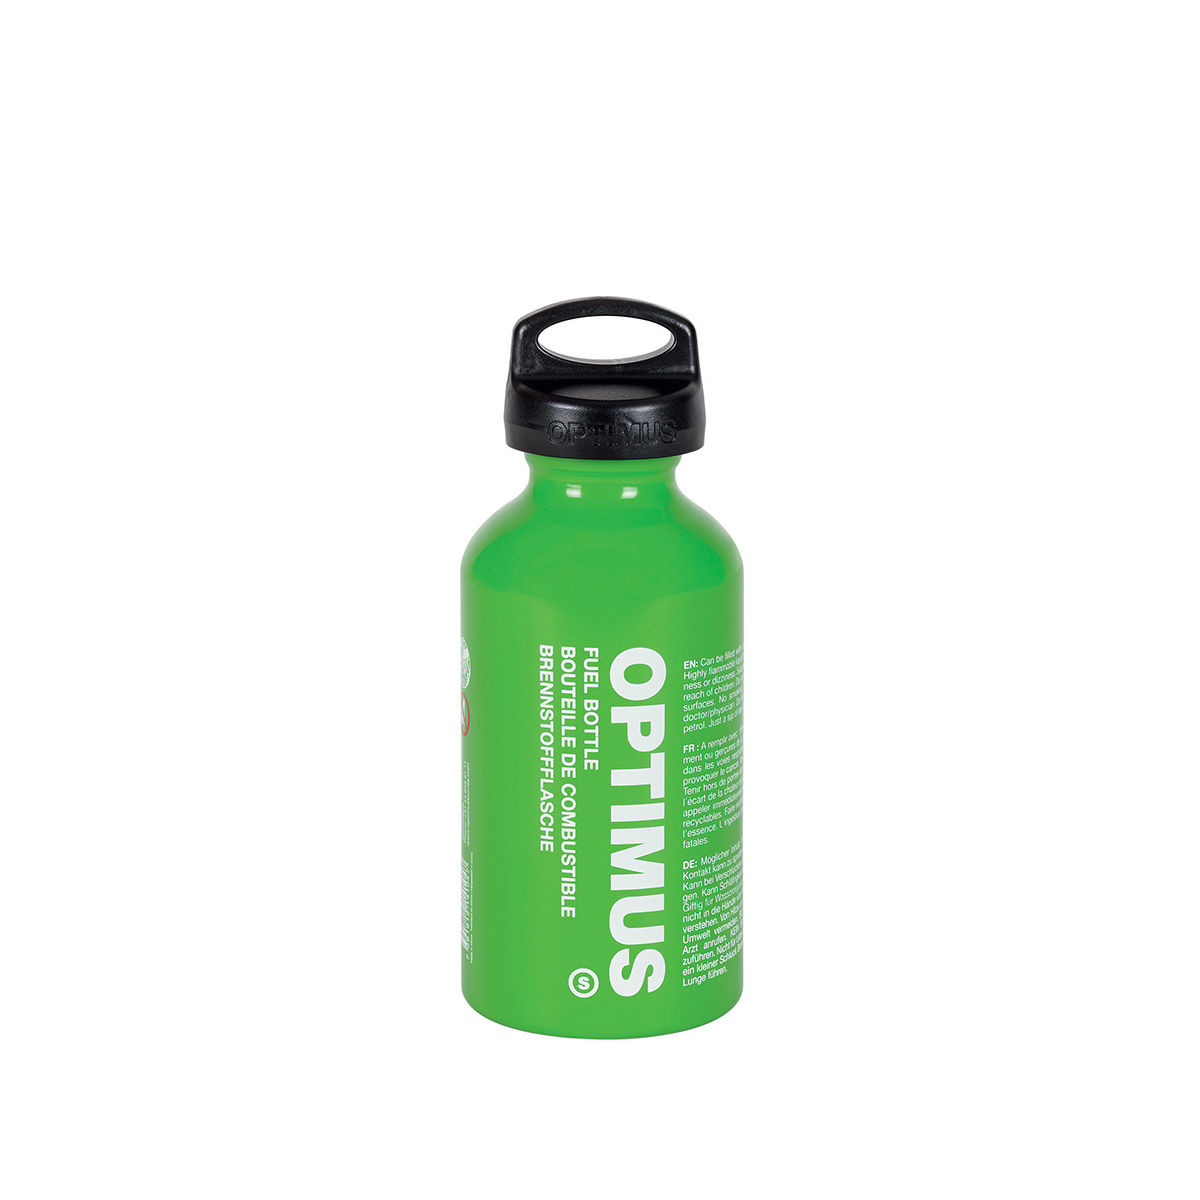 Bouteille combustible Optimus S 300 ml